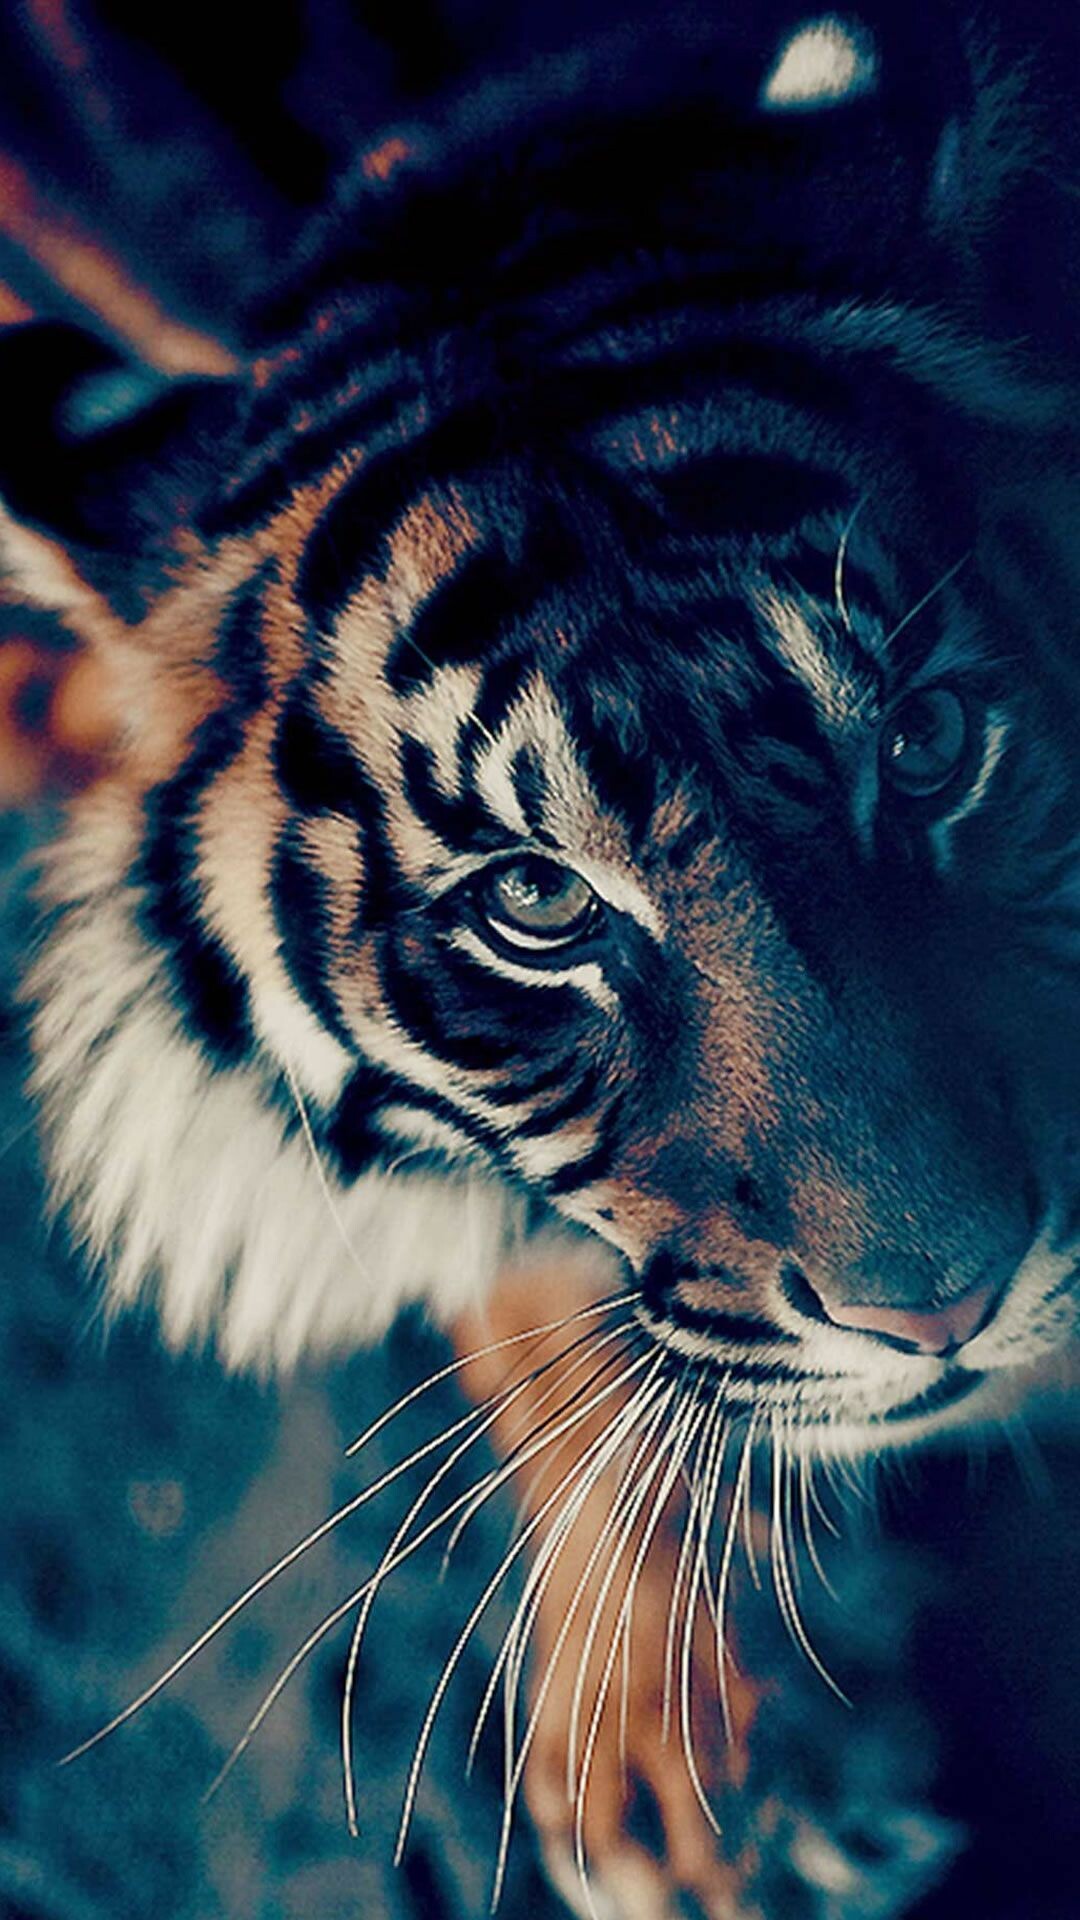 Tiger Phone Wallpapers